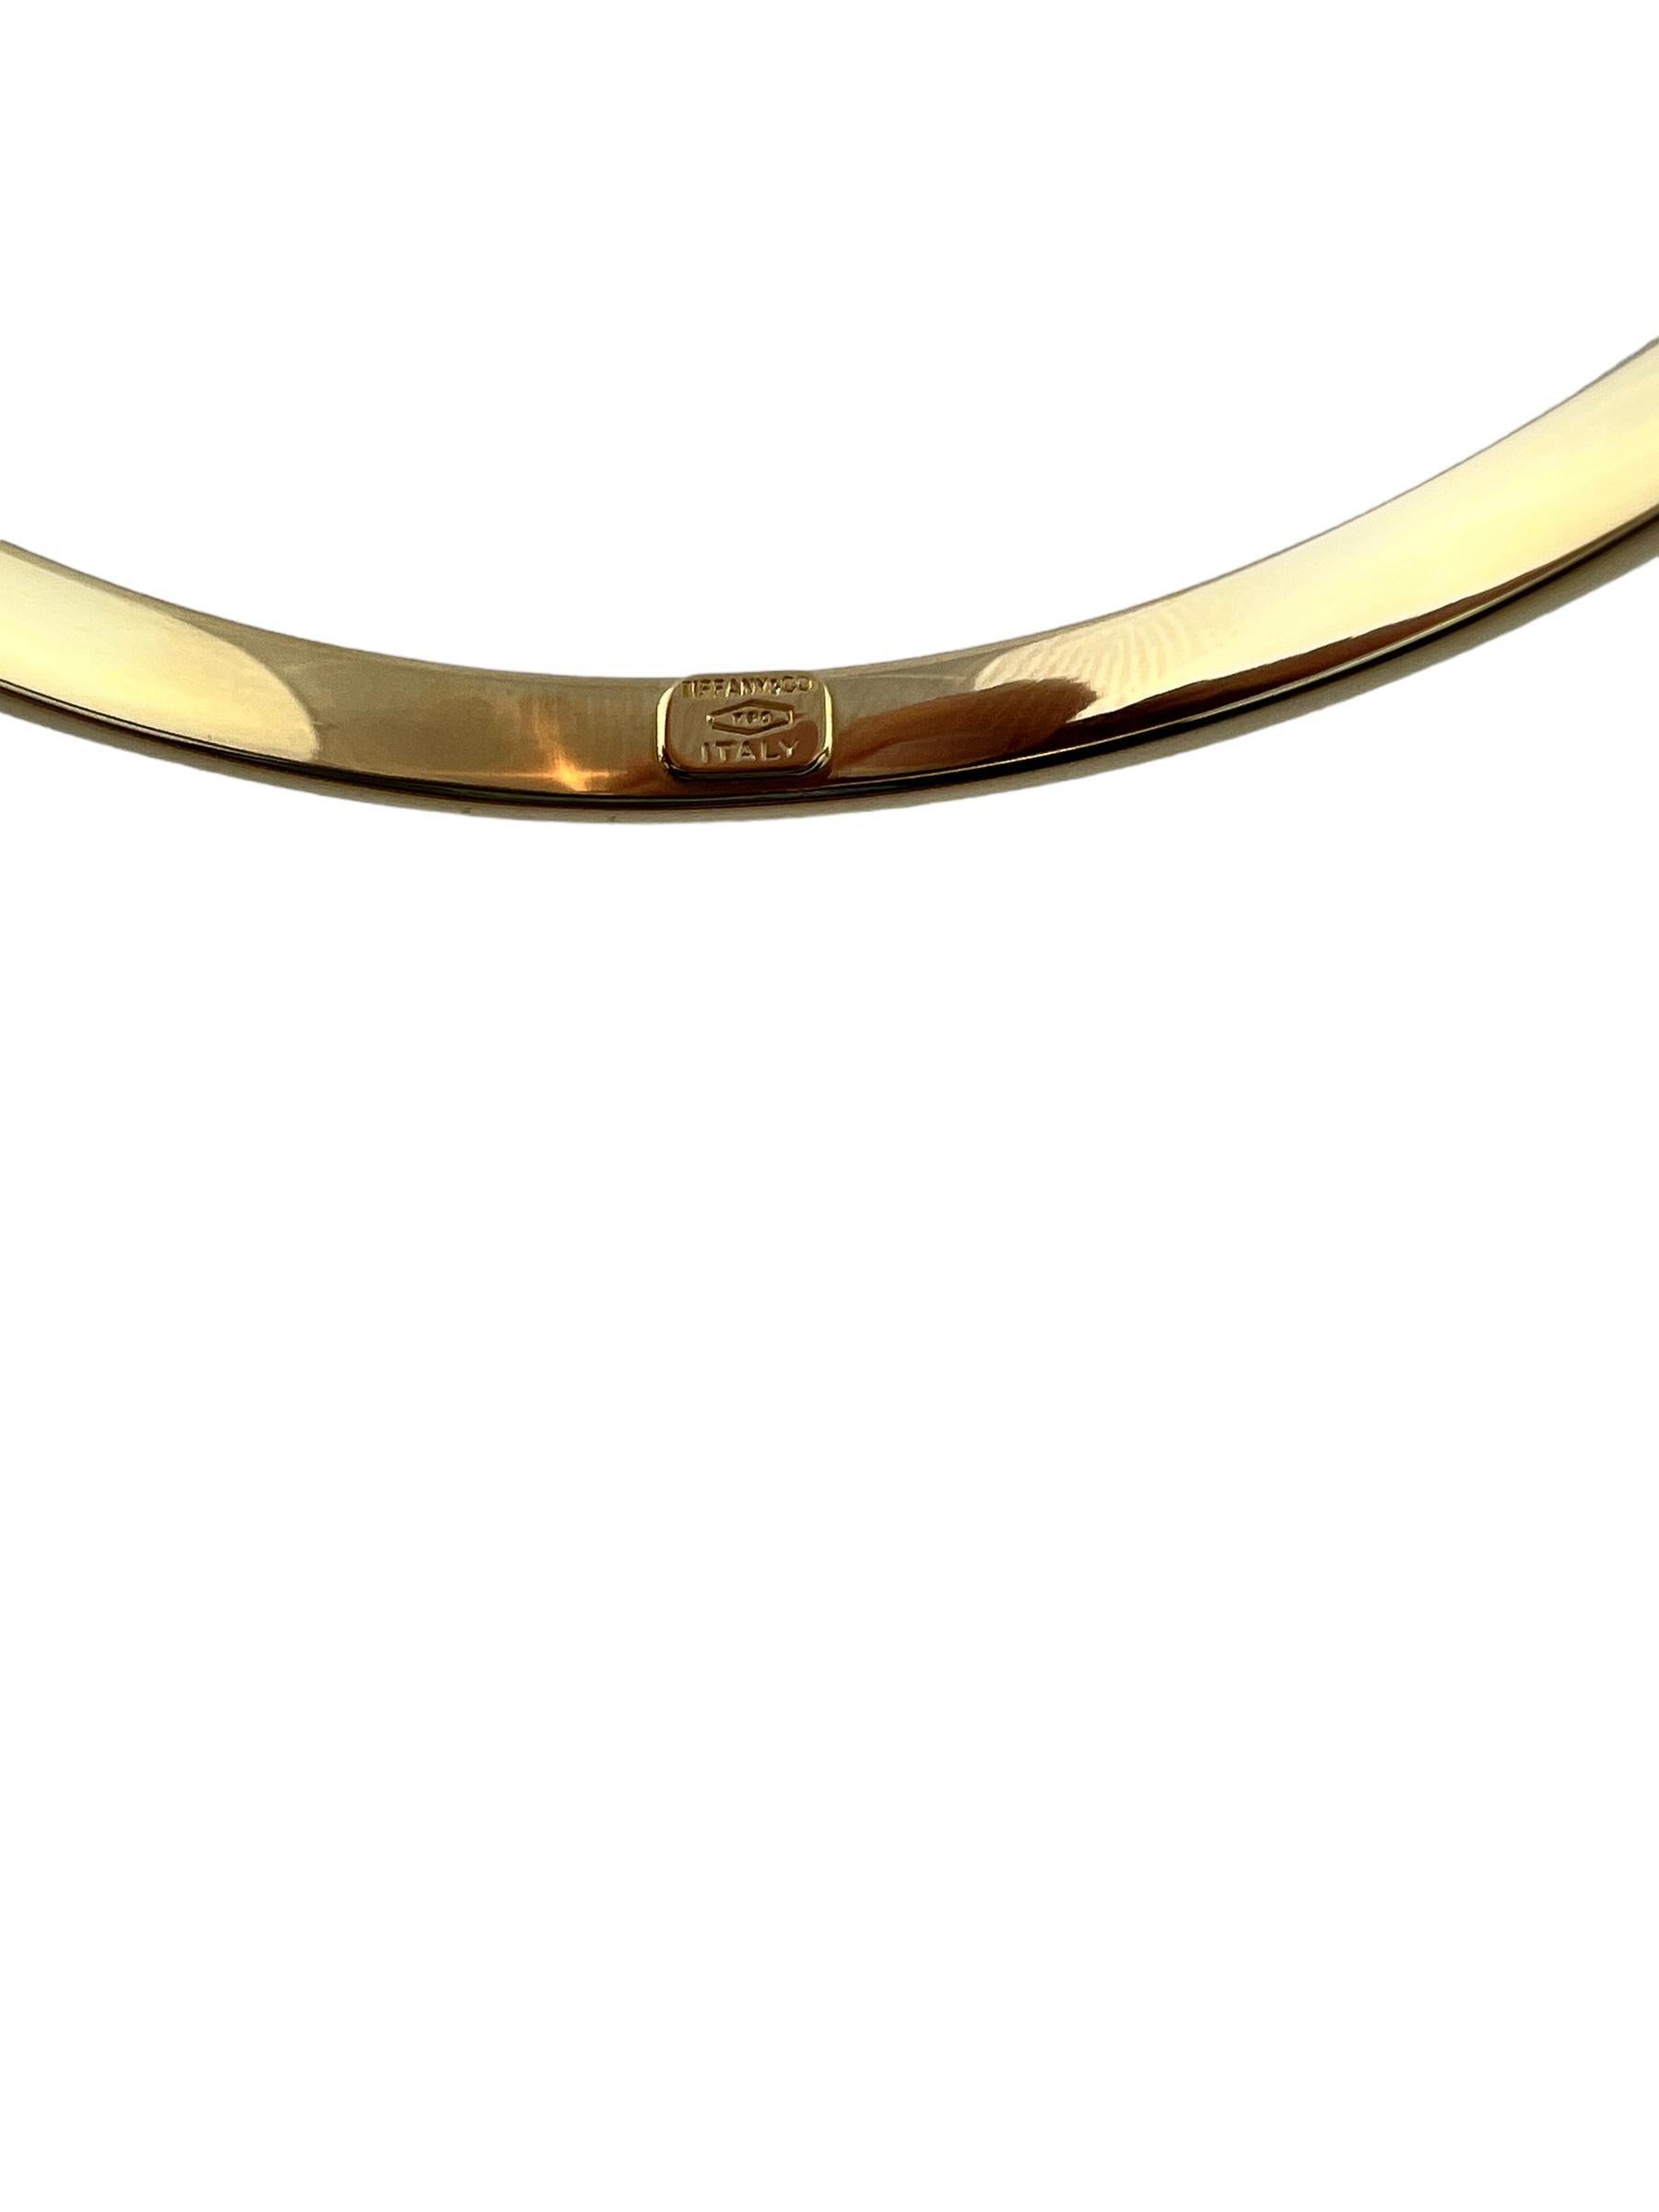 Tiffany & Co. 18K Yellow Gold Oval Bangle Bracelet #15735 In Good Condition In Washington Depot, CT